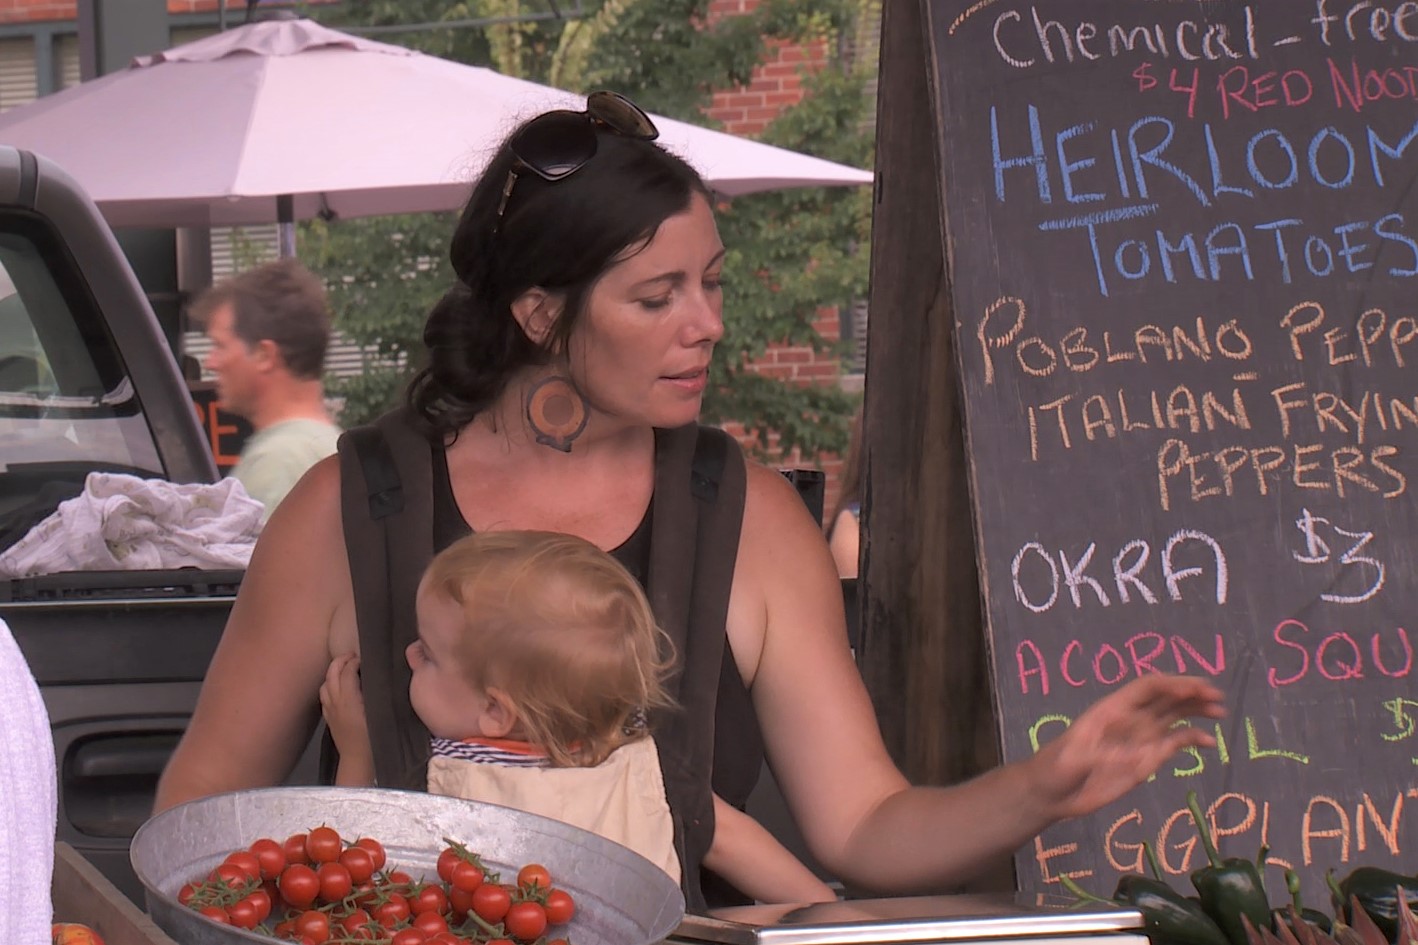 Sarah Dye interacts with customers at the Bloomington Community Farmers' Market, Aug. 17 2019.